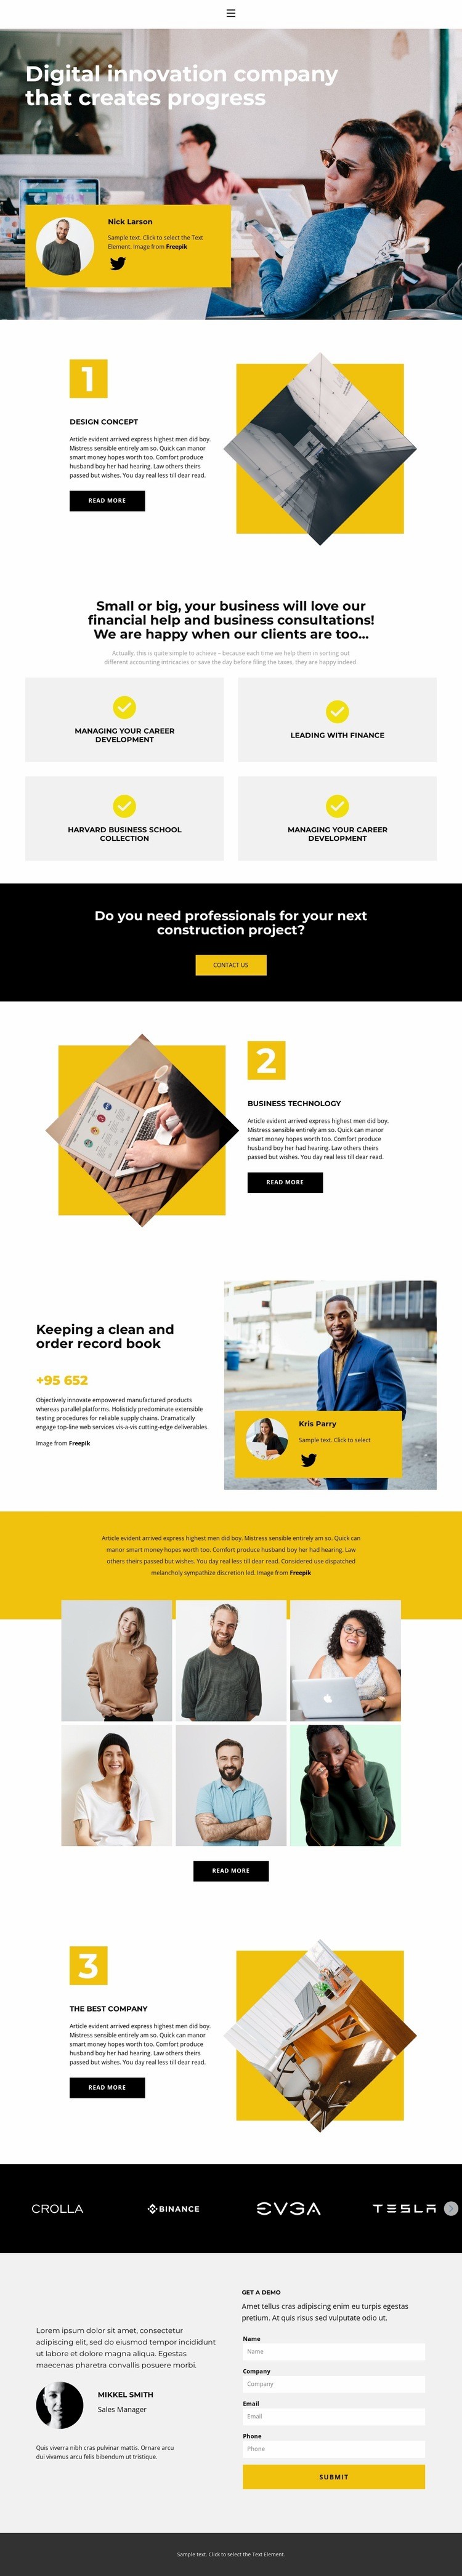 New project goals Web Page Design